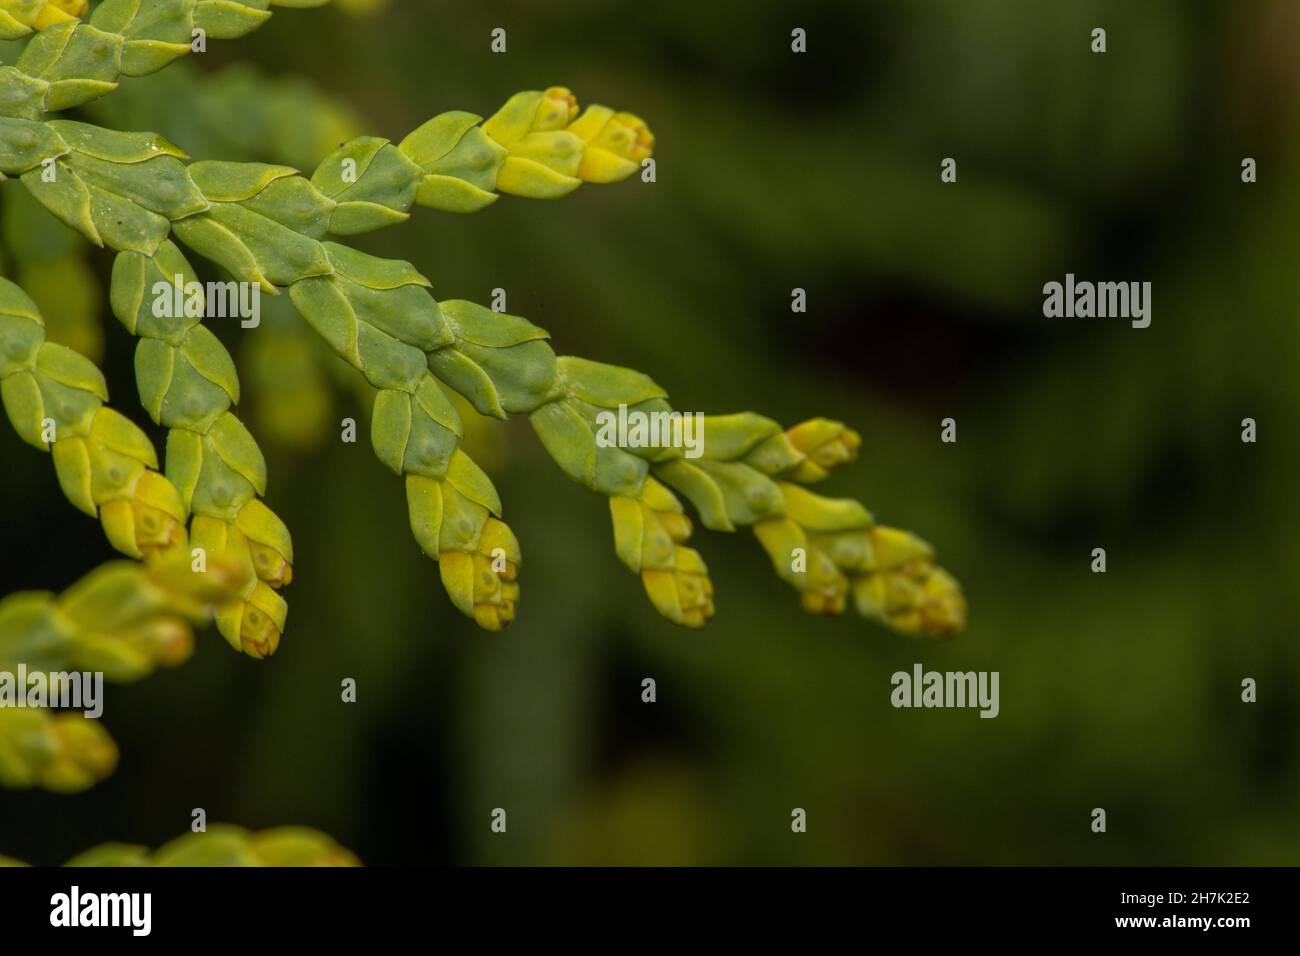 Thuja green leaves with flowers buds or young cones Stock Photo